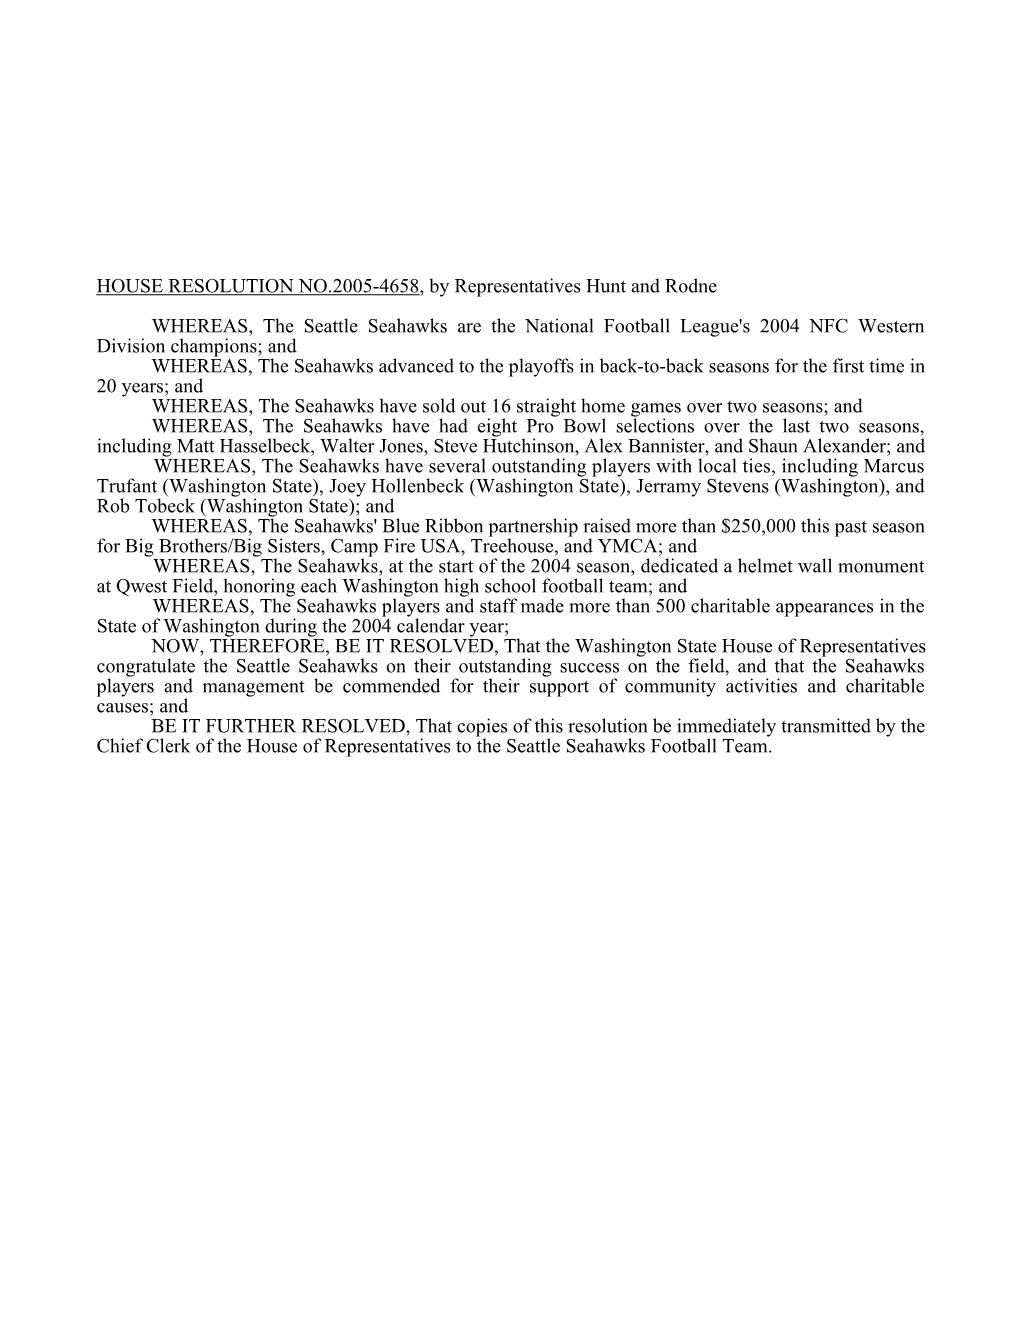 HOUSE RESOLUTION NO.2005-4658, by Representatives Hunt and Rodne WHEREAS, the Seattle Seahawks Are the National Football League'